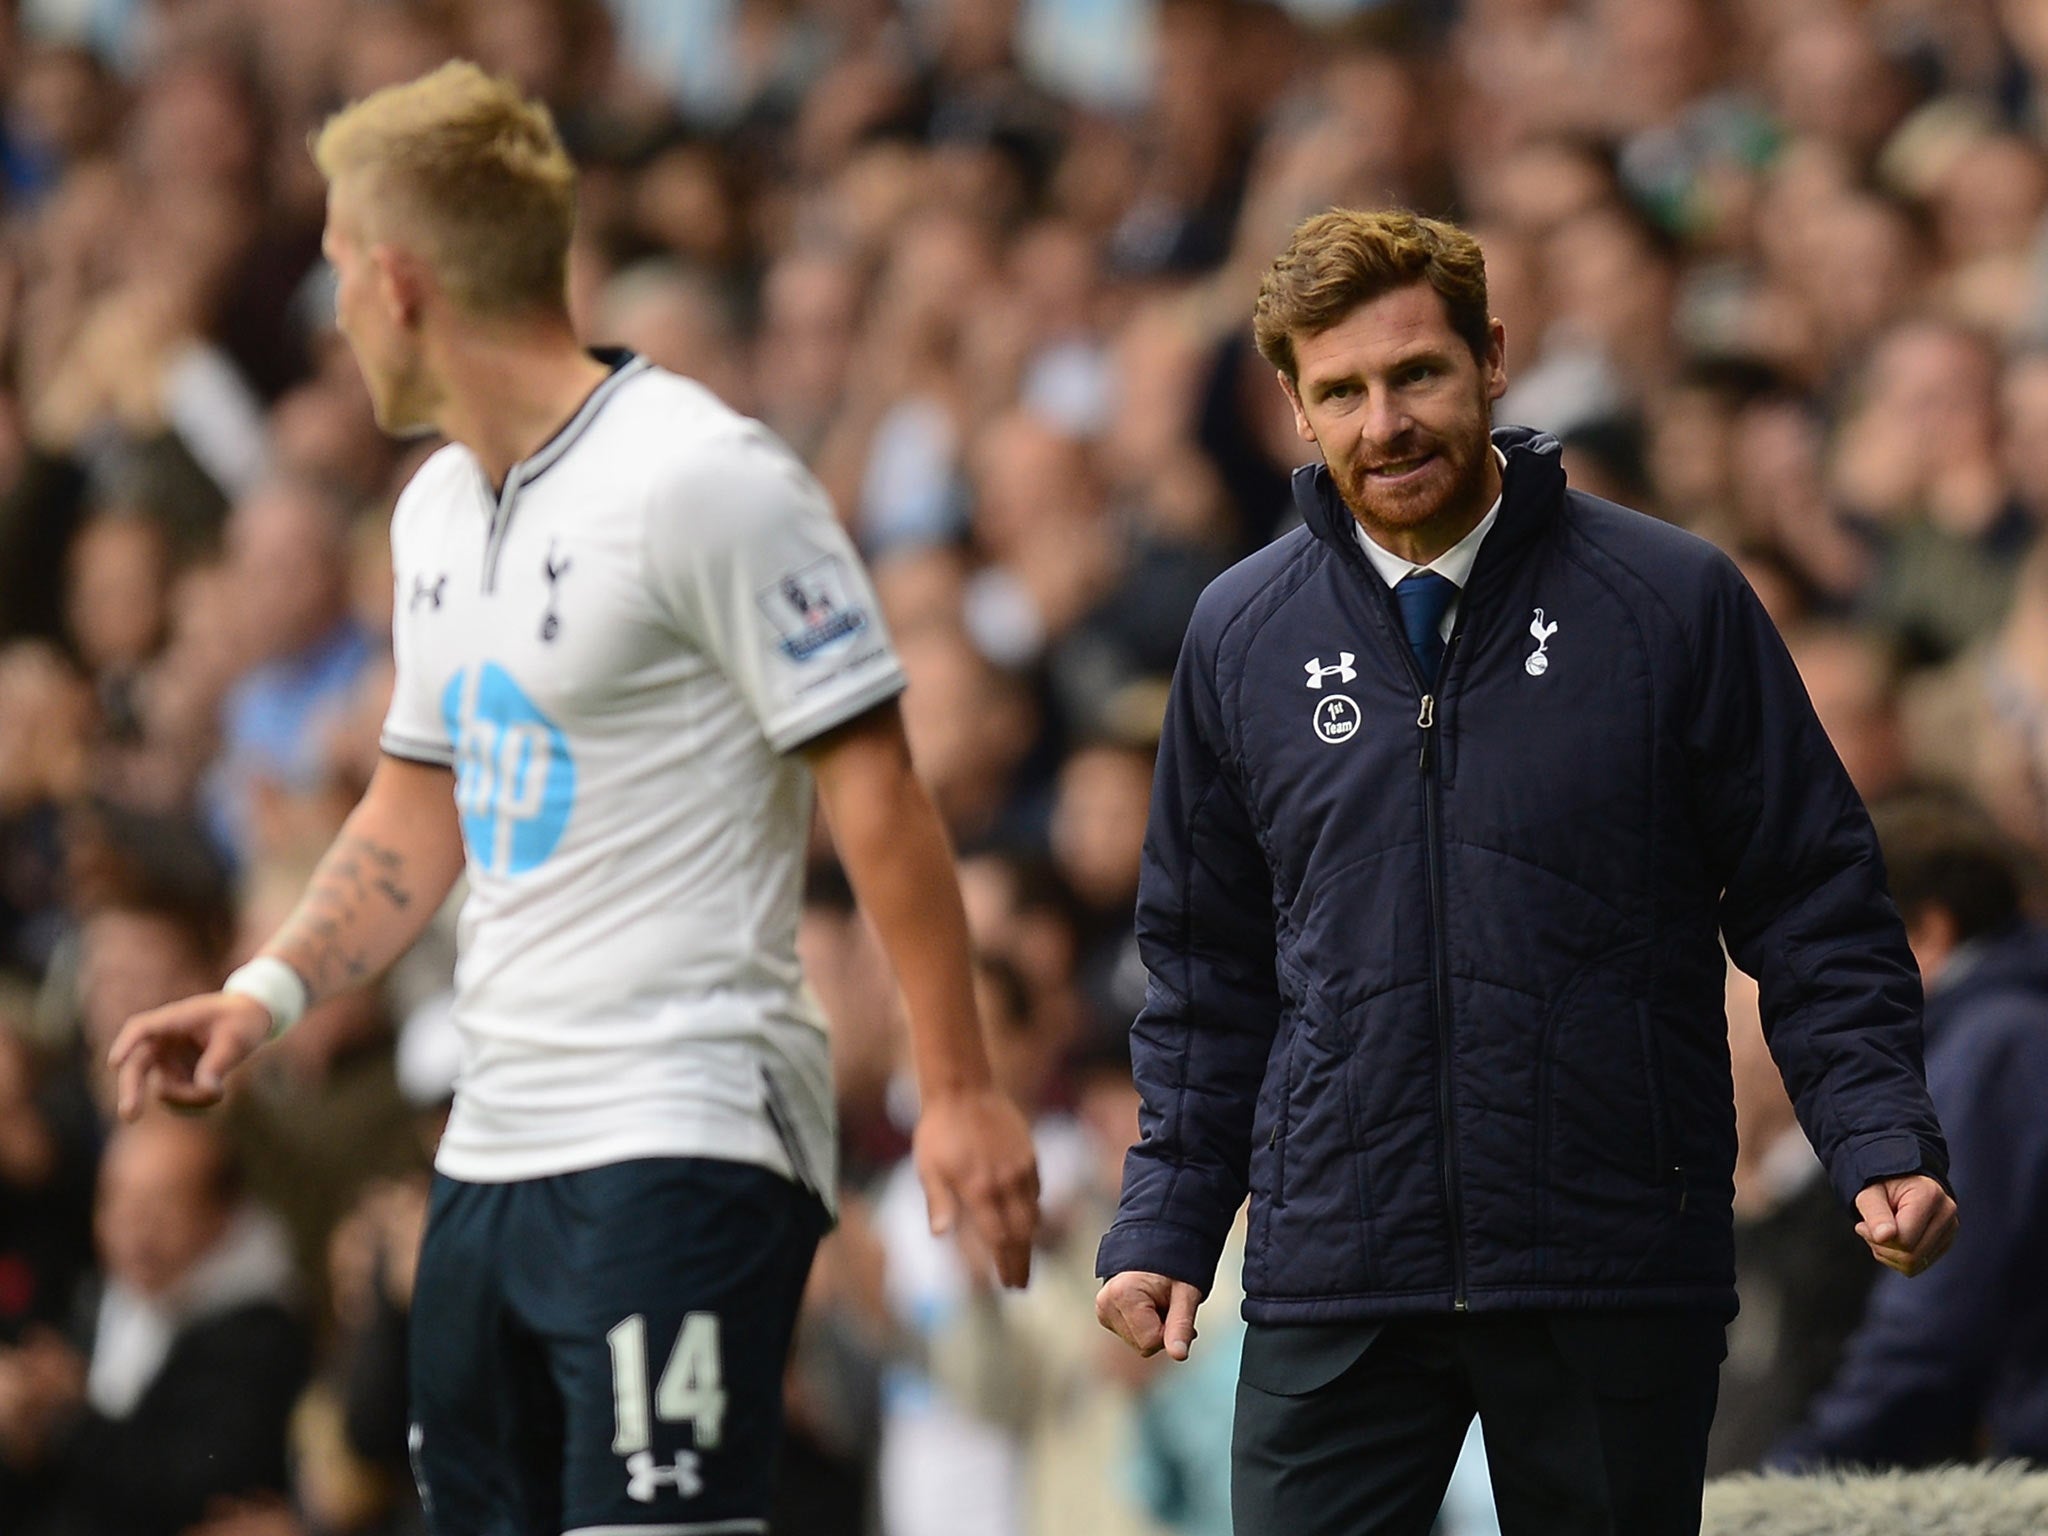 Andre Villas-Boas offers directions to Lewis Holtby